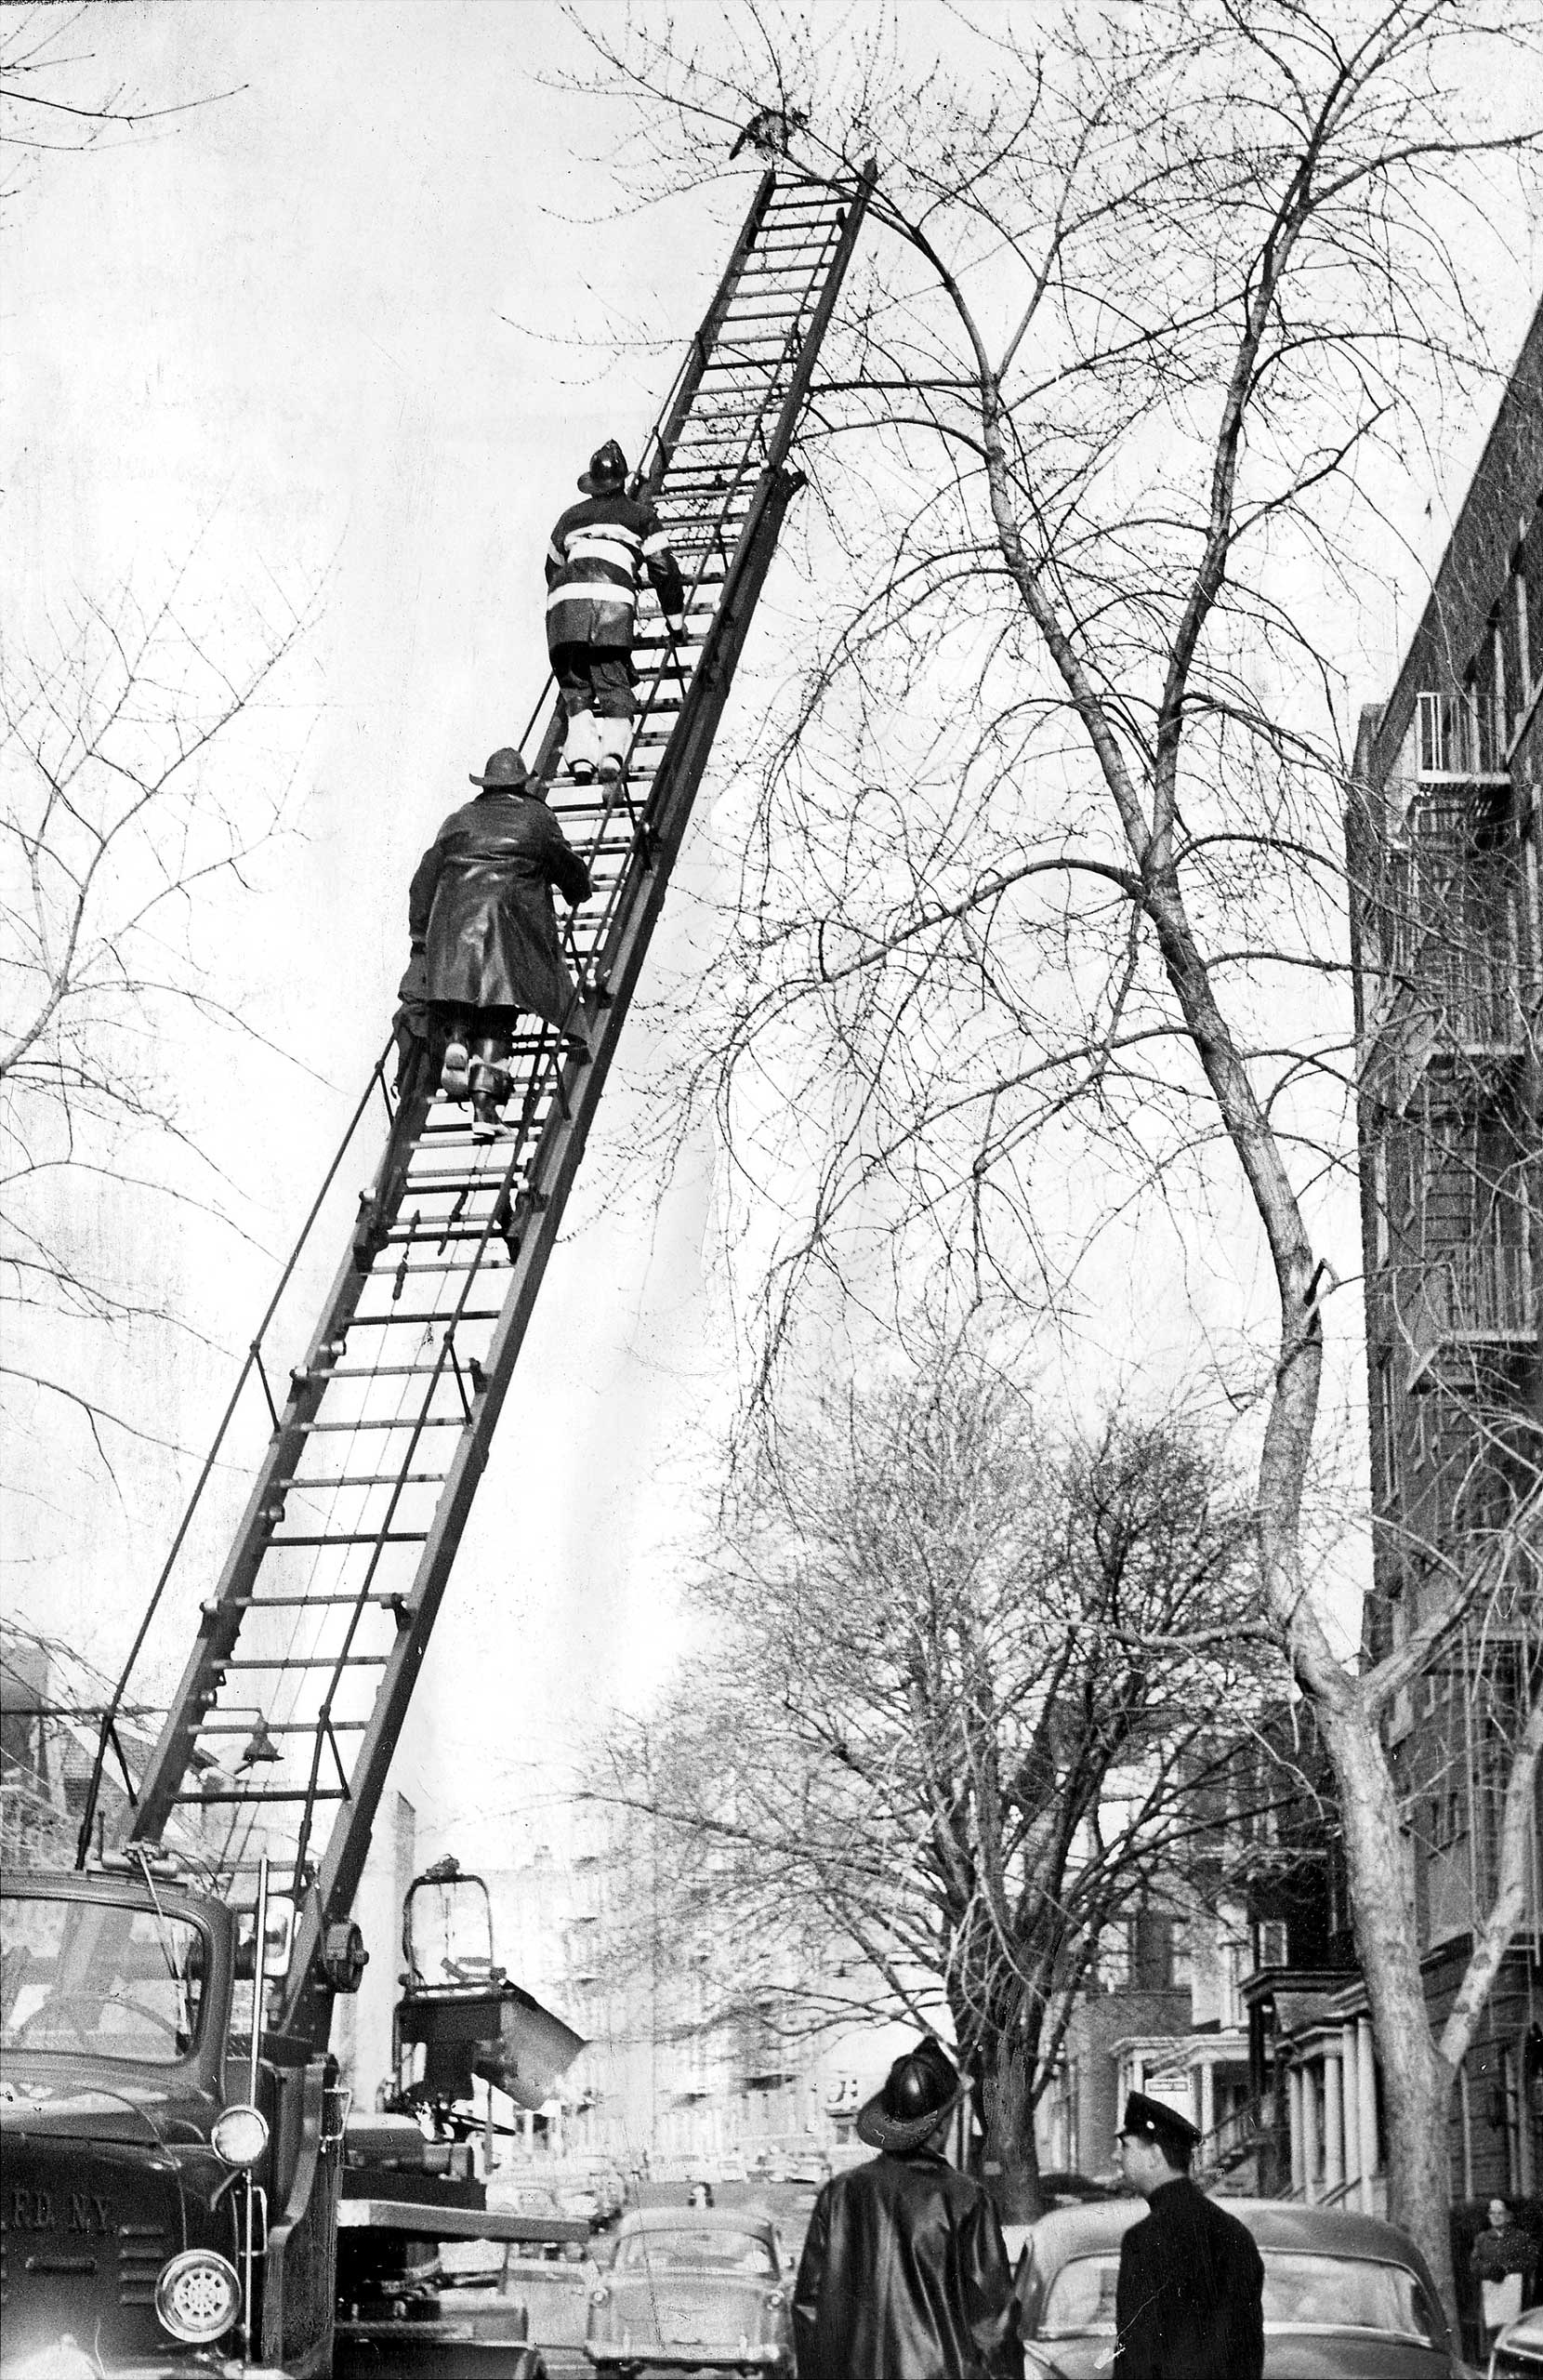 Bronx fireman Jesse Johnson and fellow firefighter climb an aerial ladder to rescue a cat who has been caught in the top of a tree for 26 hours in Bronx, New York City.